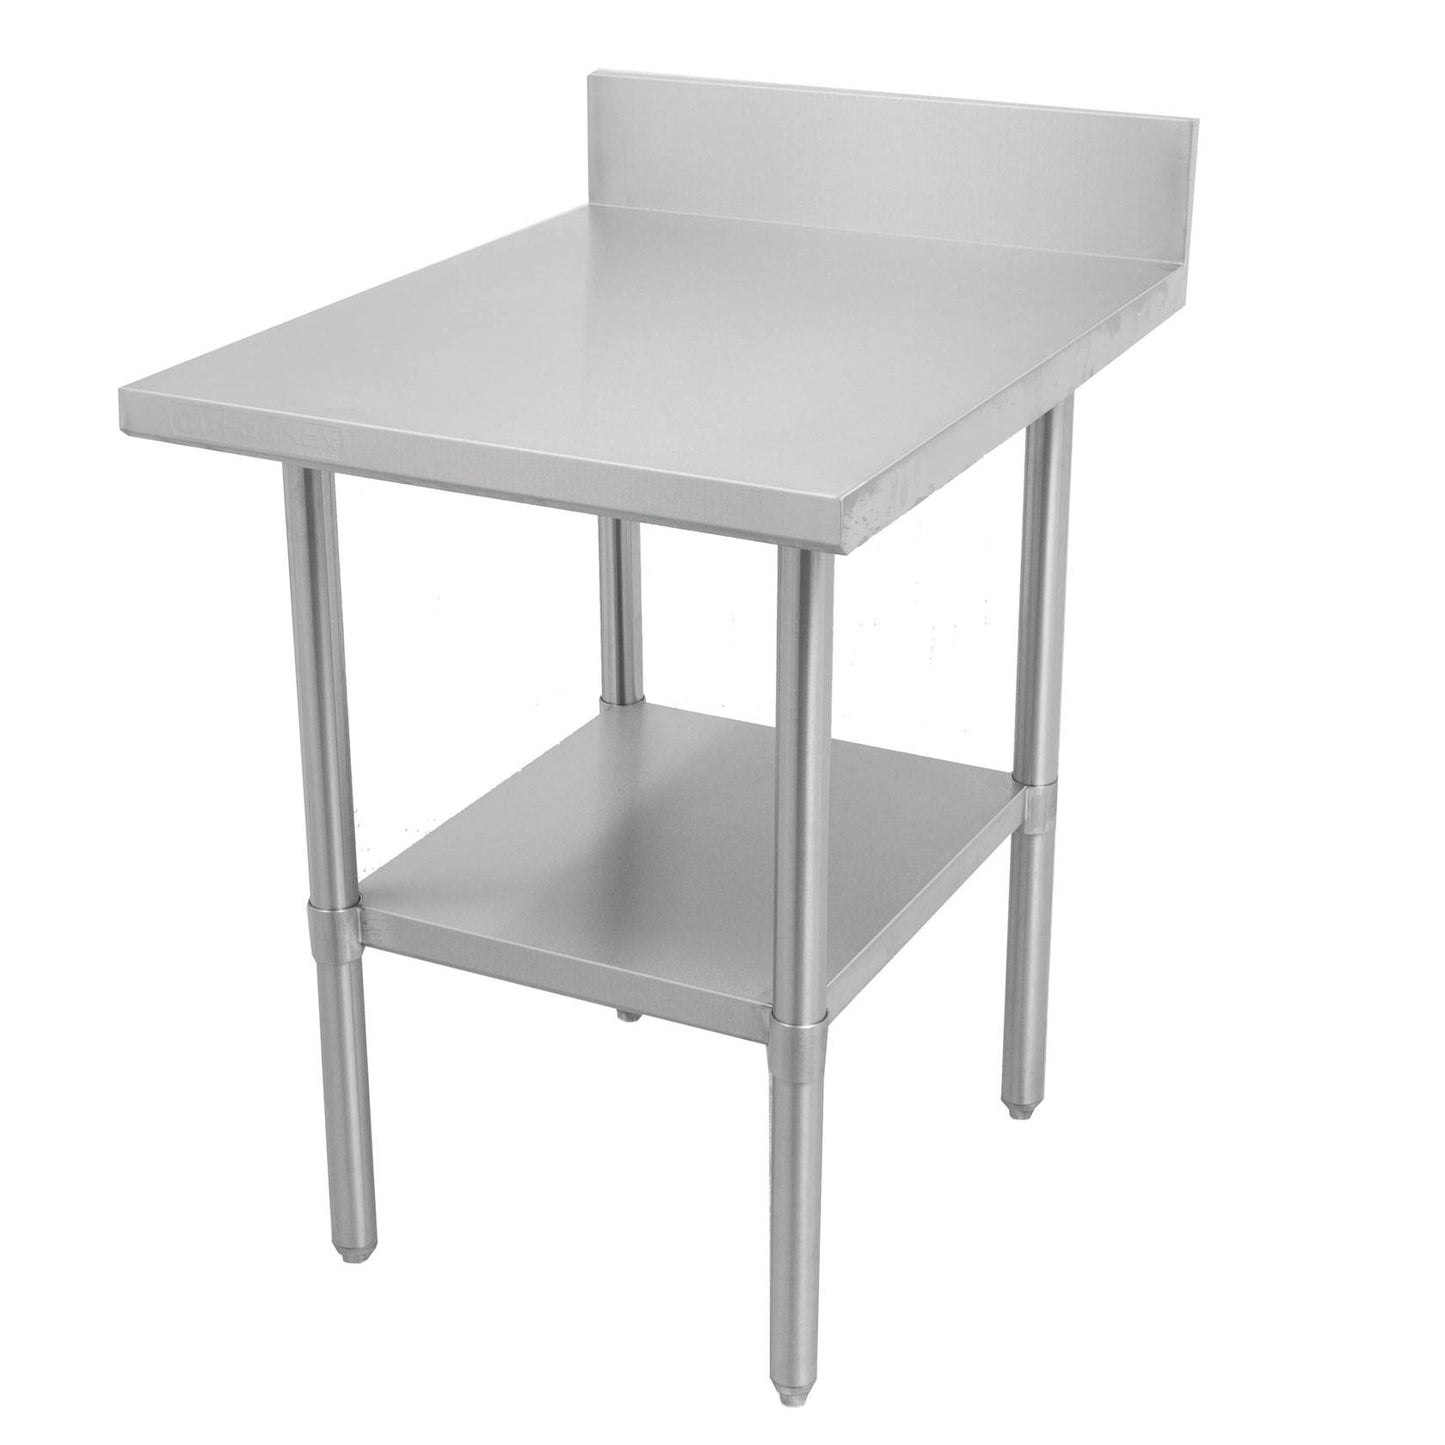 Thorinox DSST-3012-SS Table, 12"W x 30"D x 34"H, Stainless Steel Table with Stainless Steel Shelf